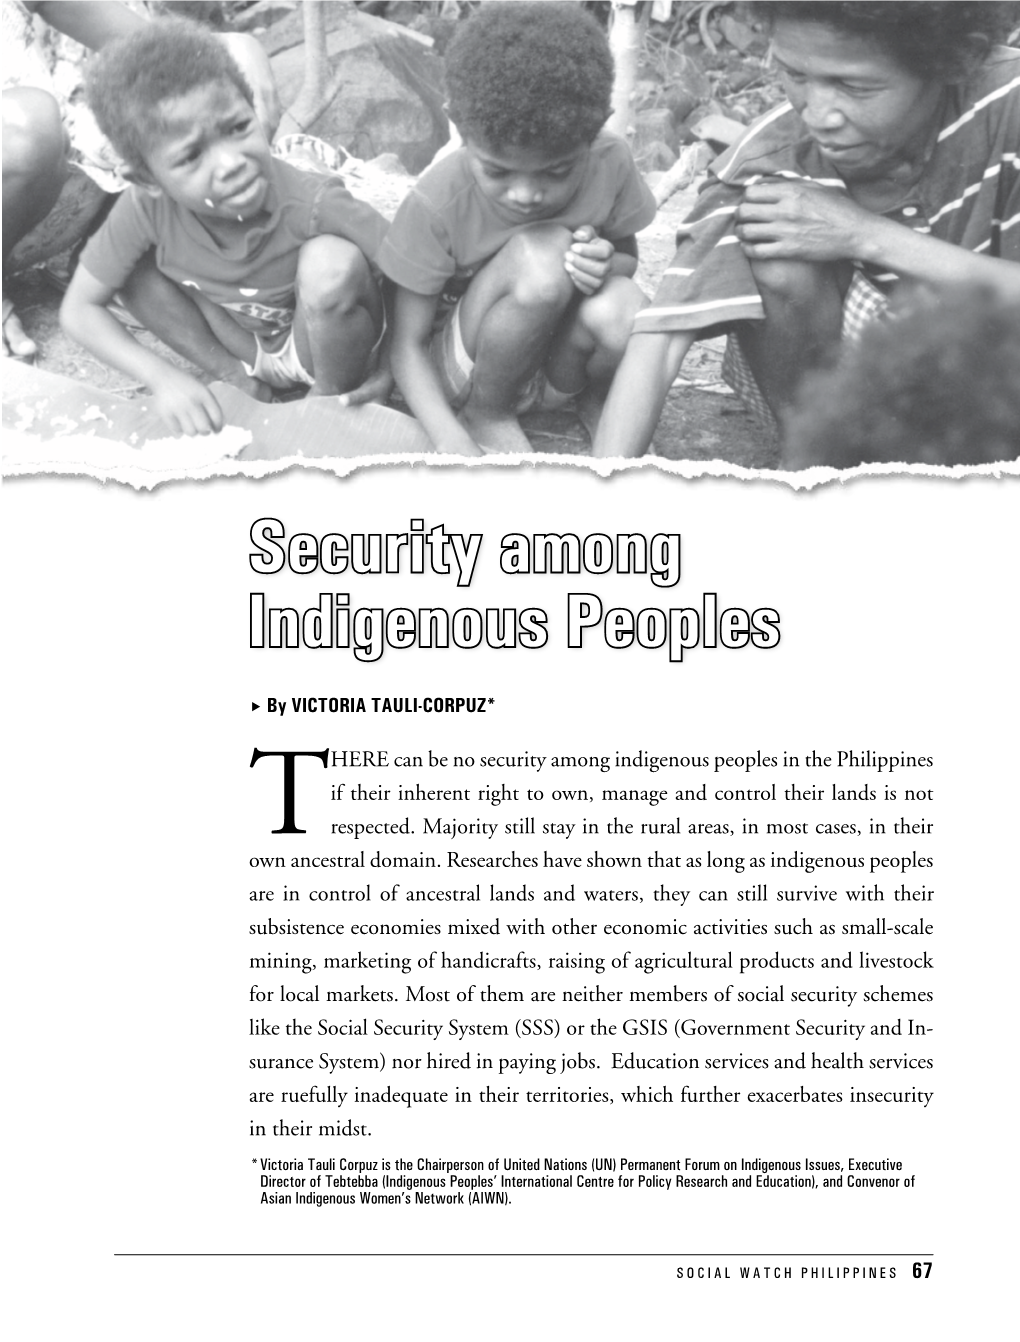 Security Among Indigenous Peoples